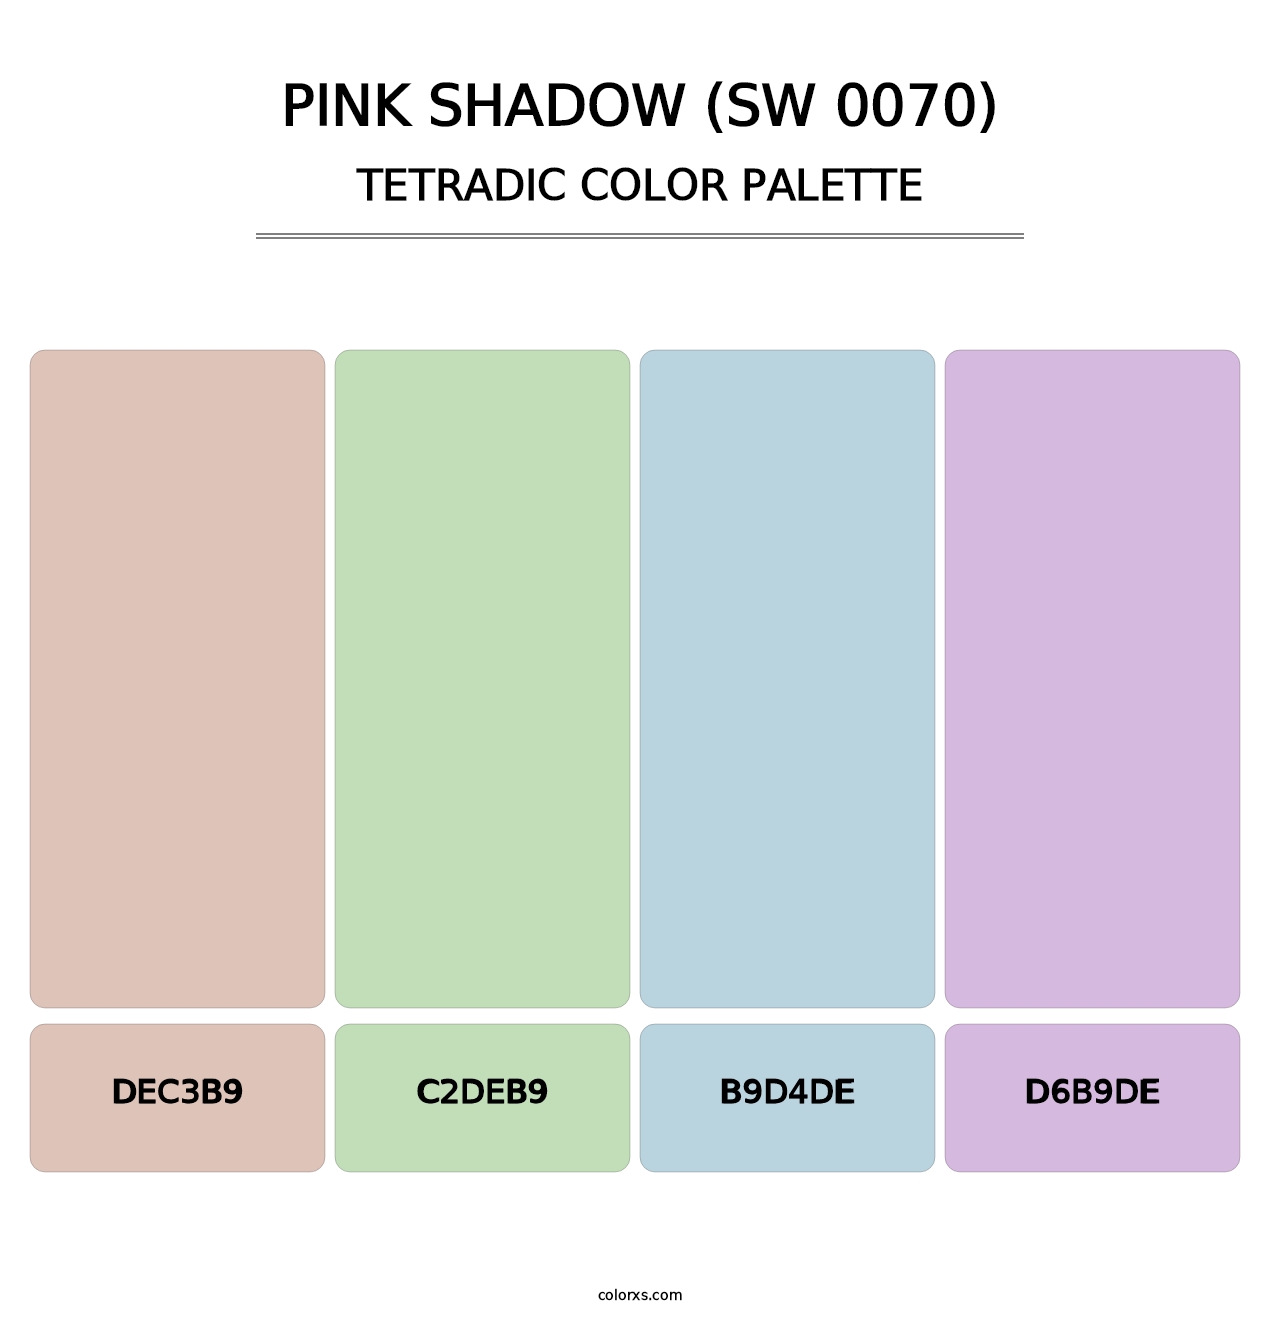 Pink Shadow (SW 0070) - Tetradic Color Palette